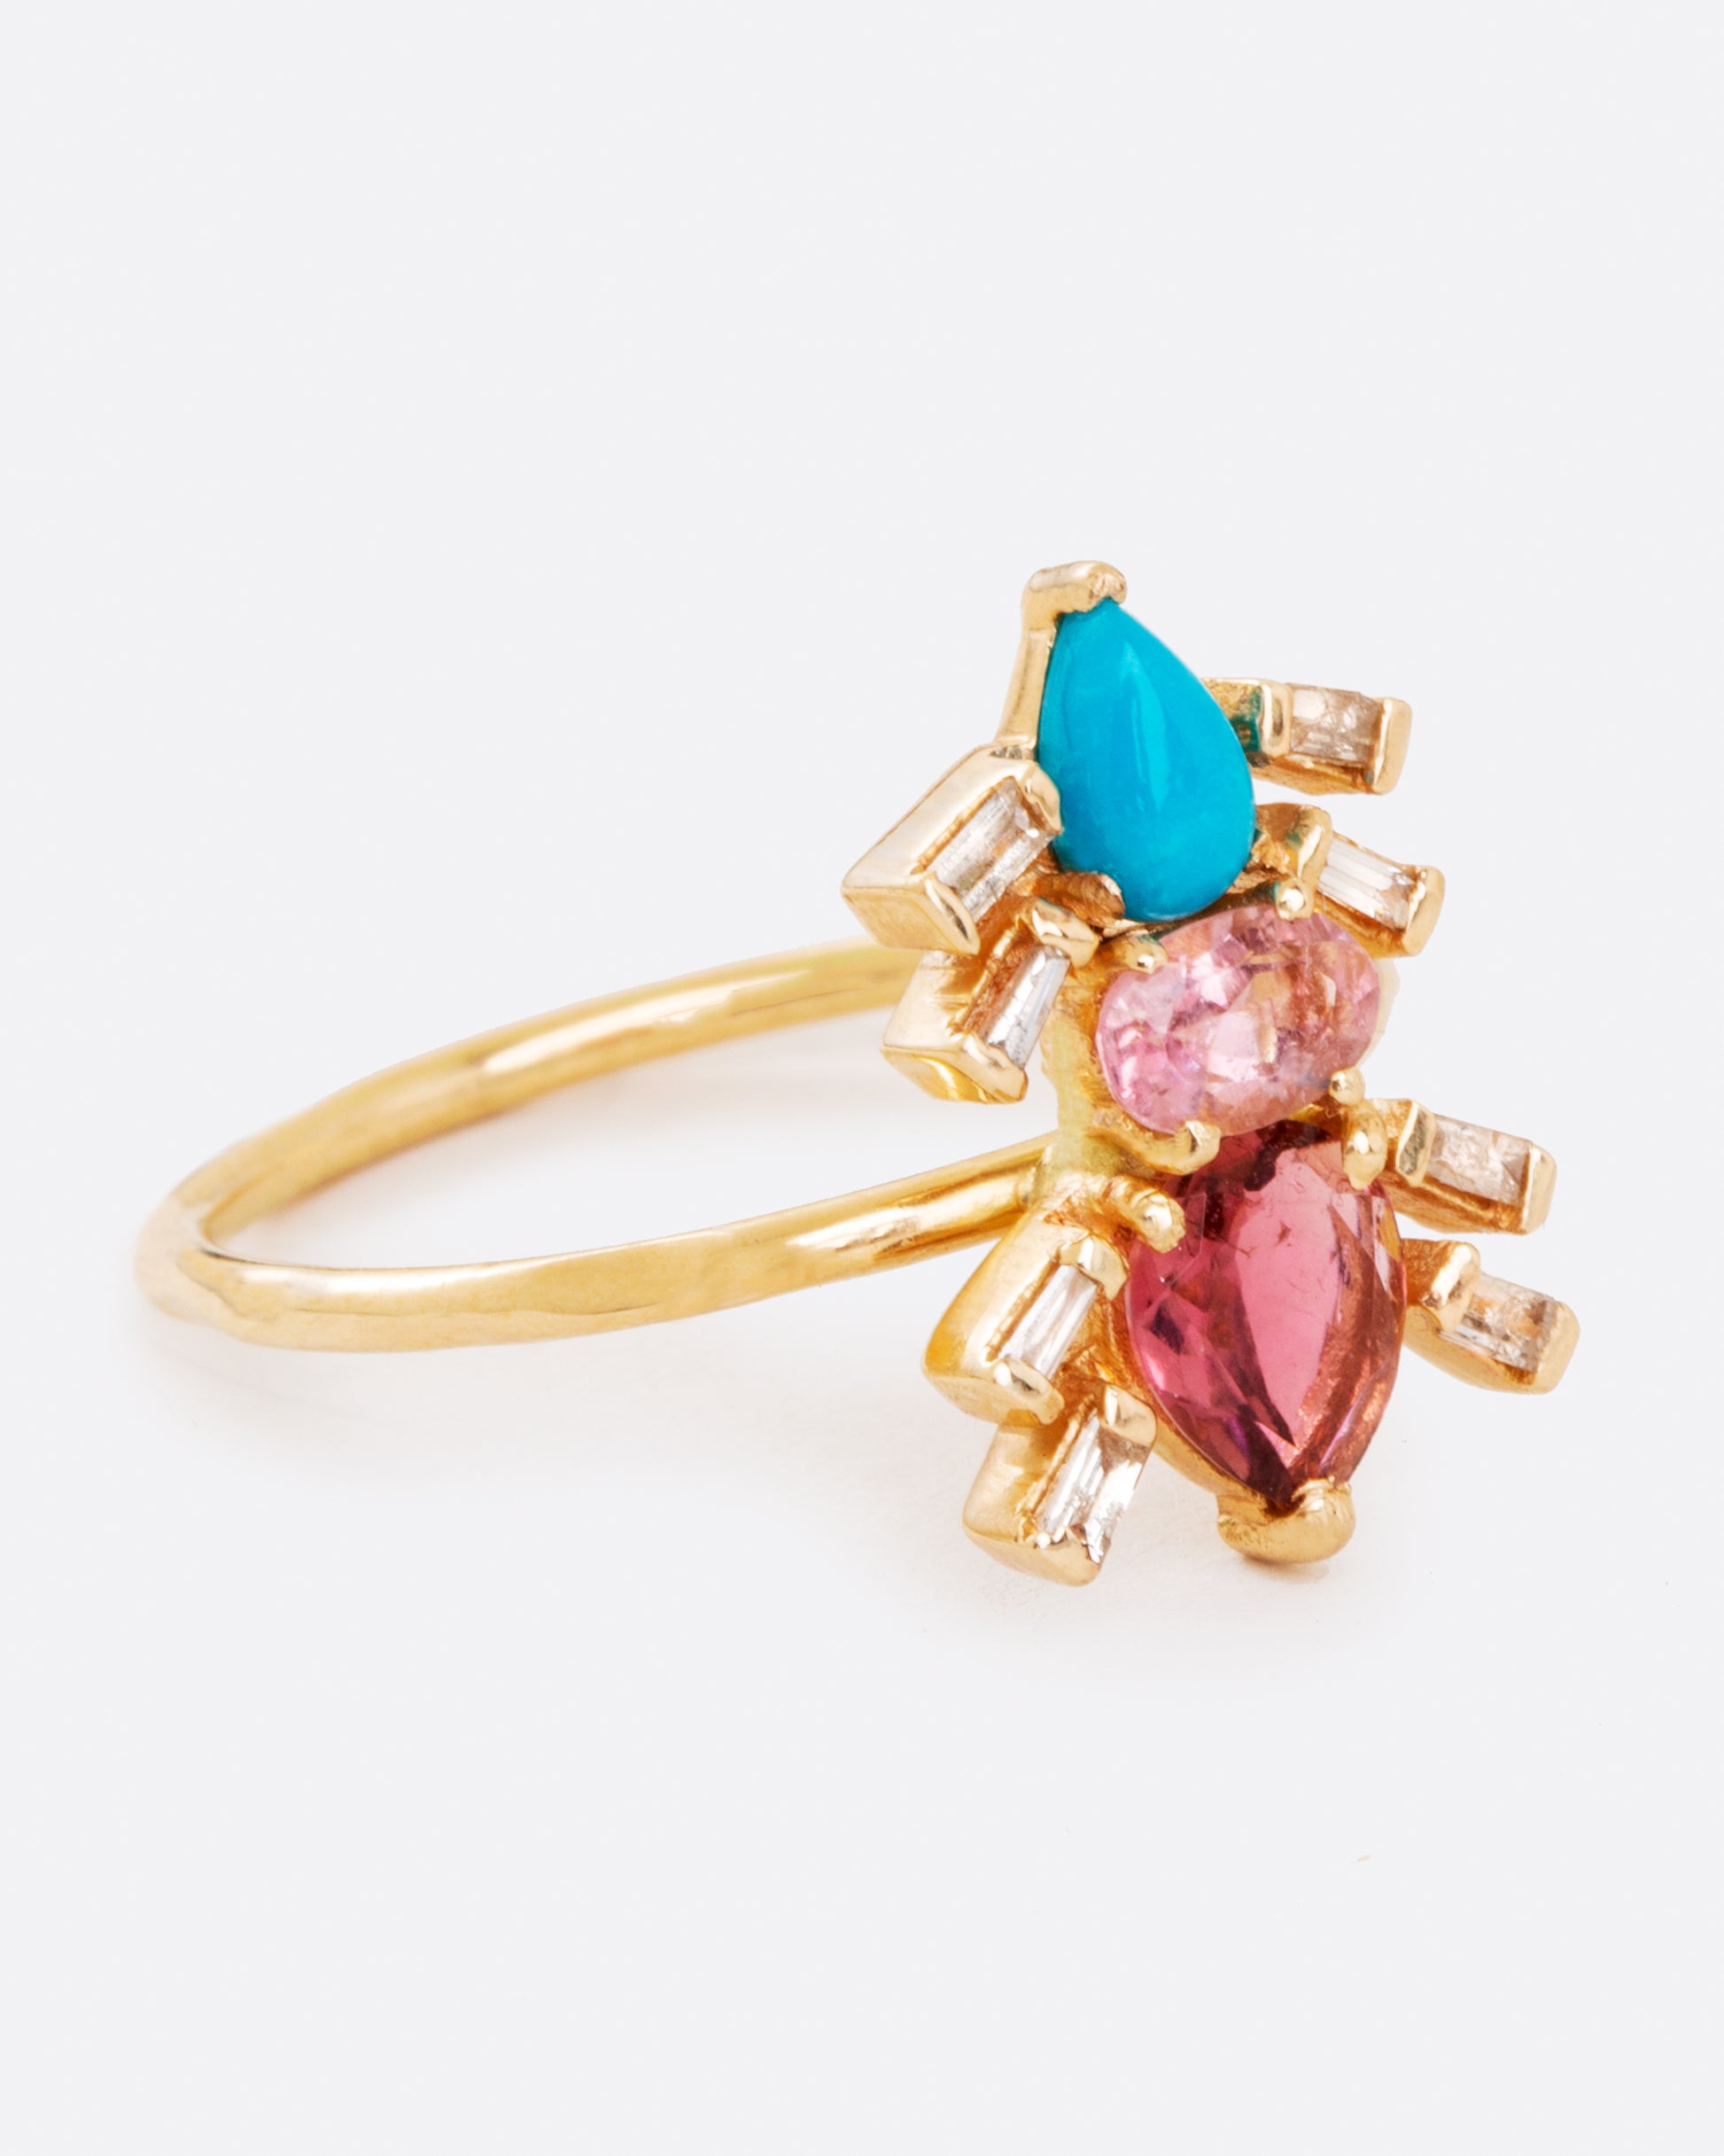 A crystalline critter to crawl on your finger; this composition of pink tourmalines, turquoise, and diamonds forms an elegant ant.